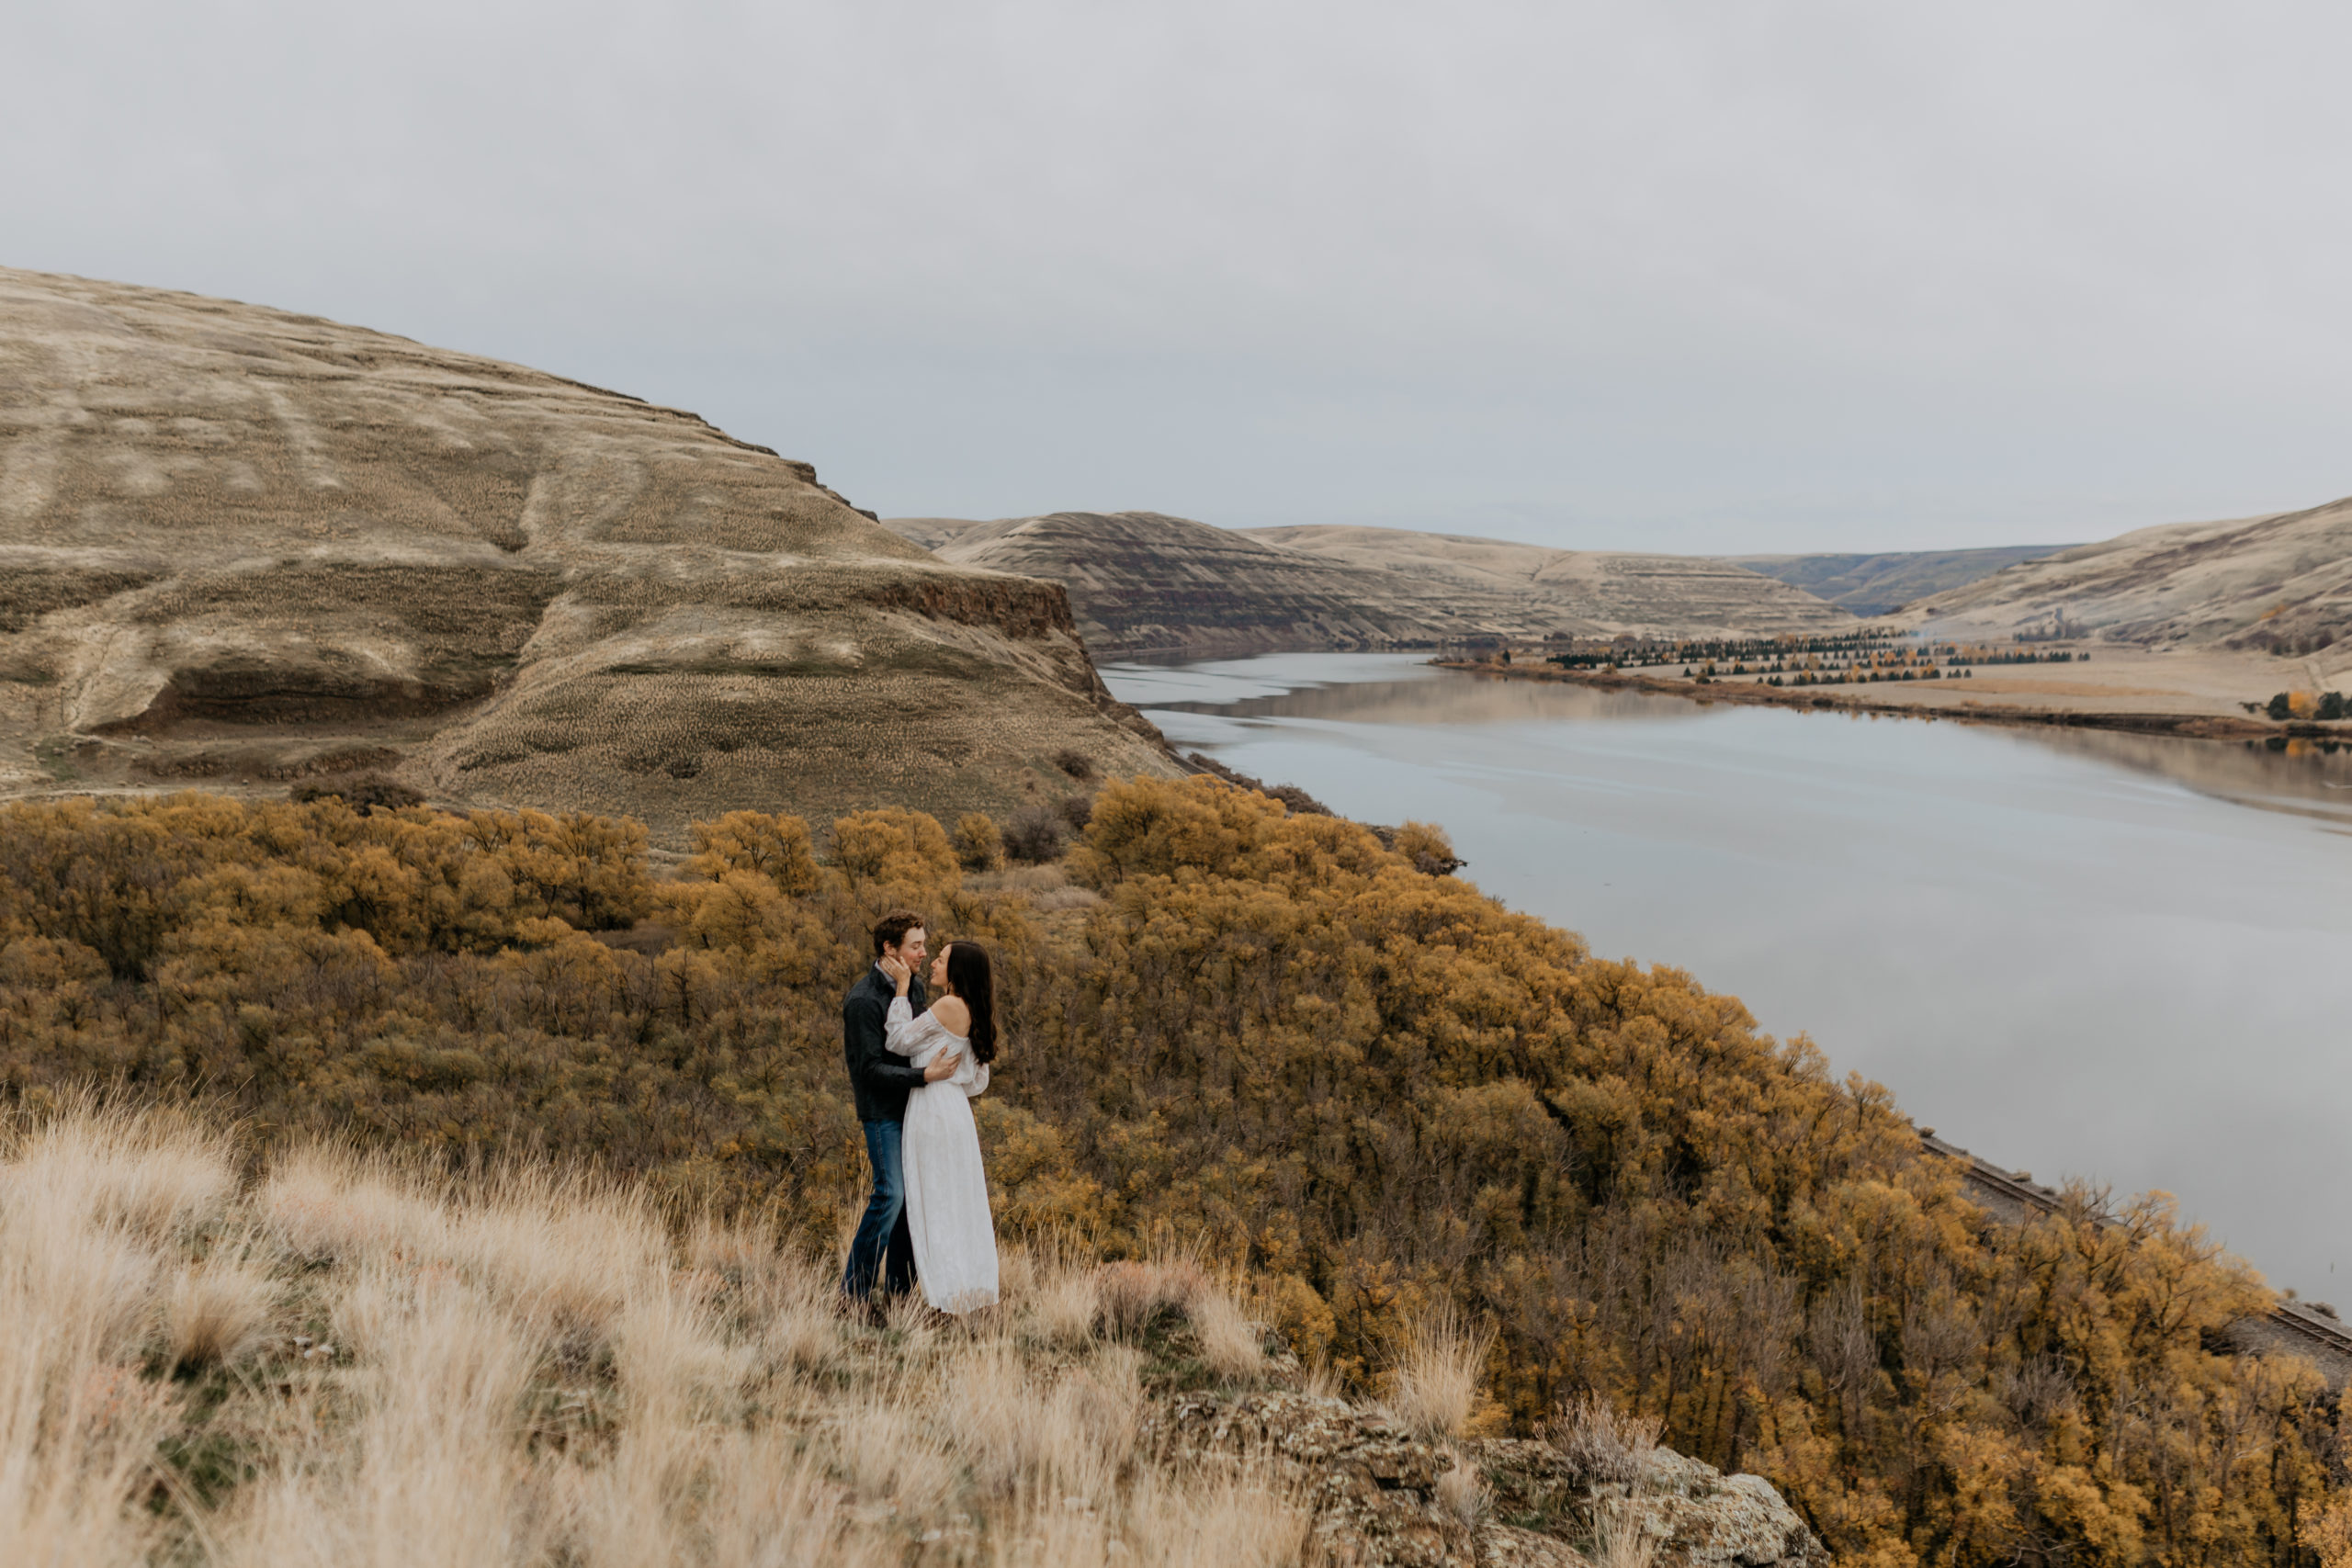 couple embracing with view of the snake river